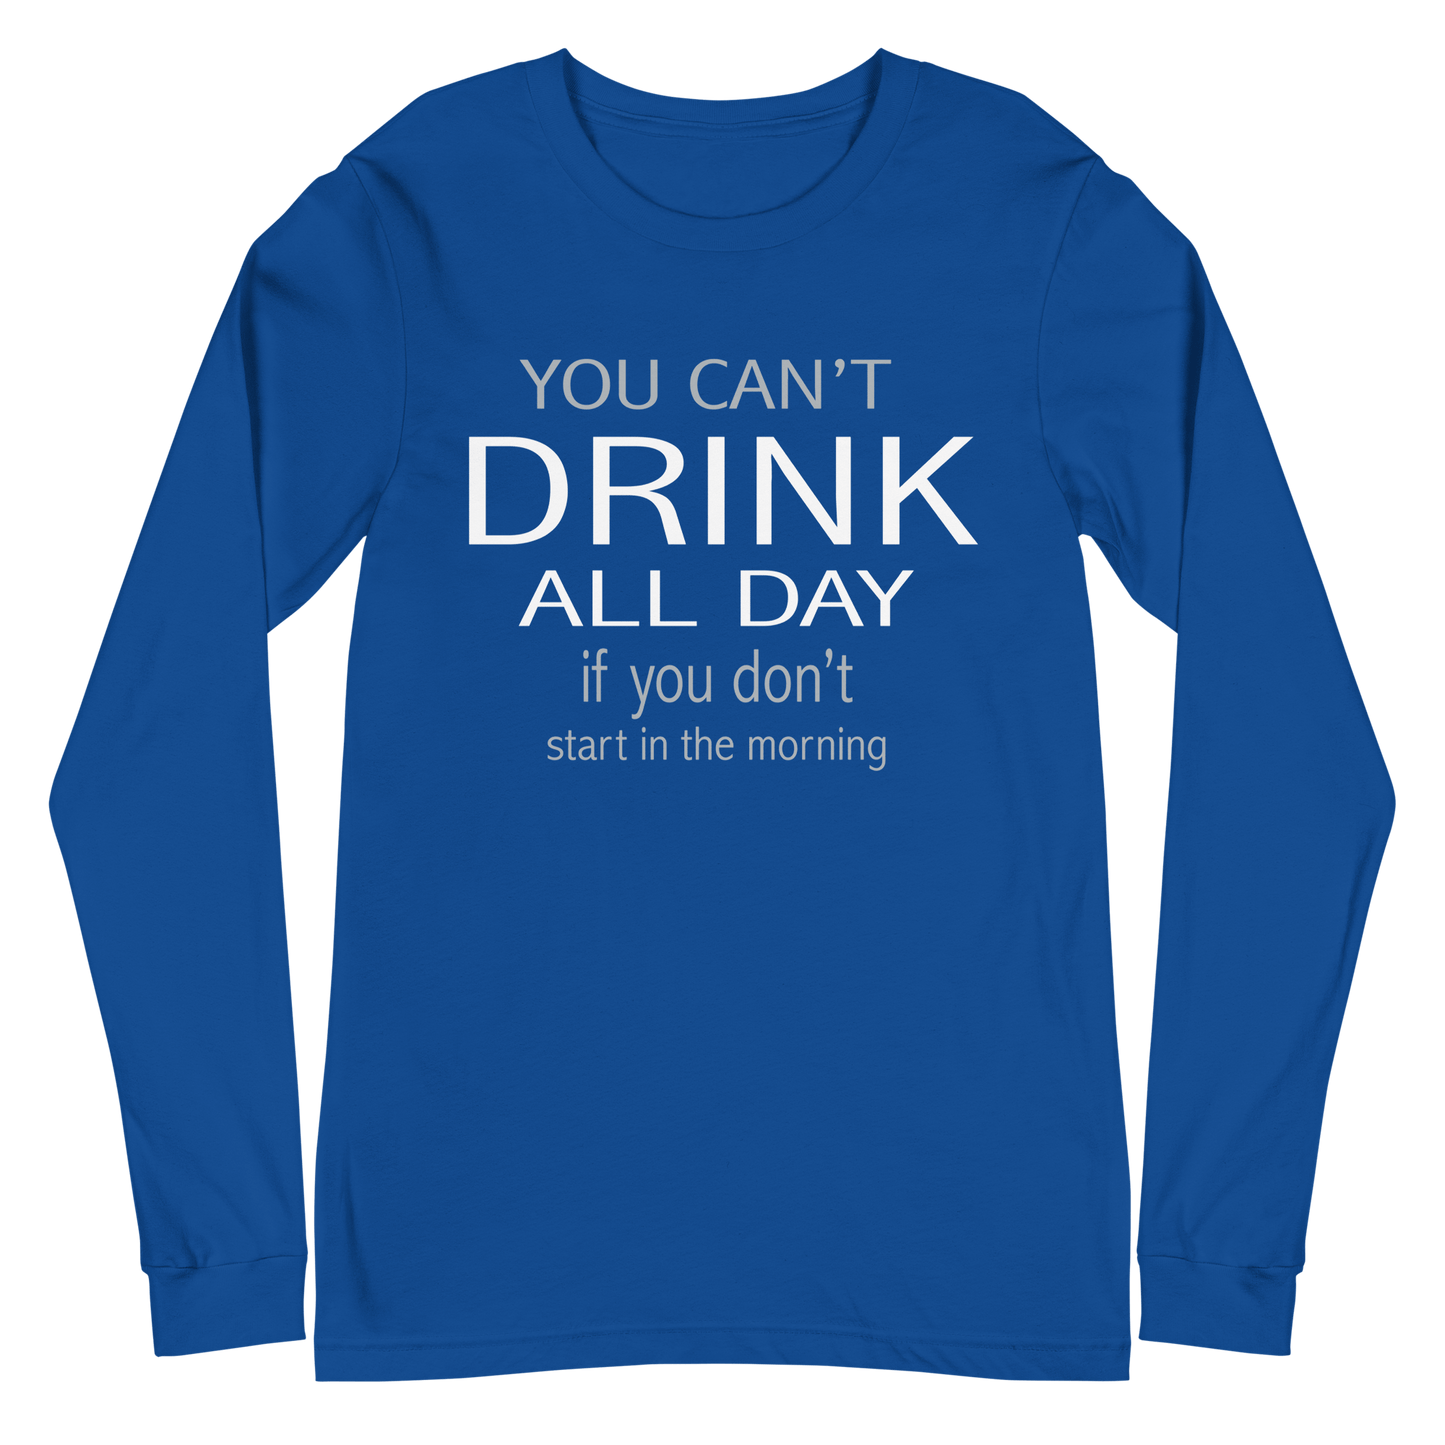 You Can't Drink All Day if You Don't Start in the Morning Long Sleeve Tee